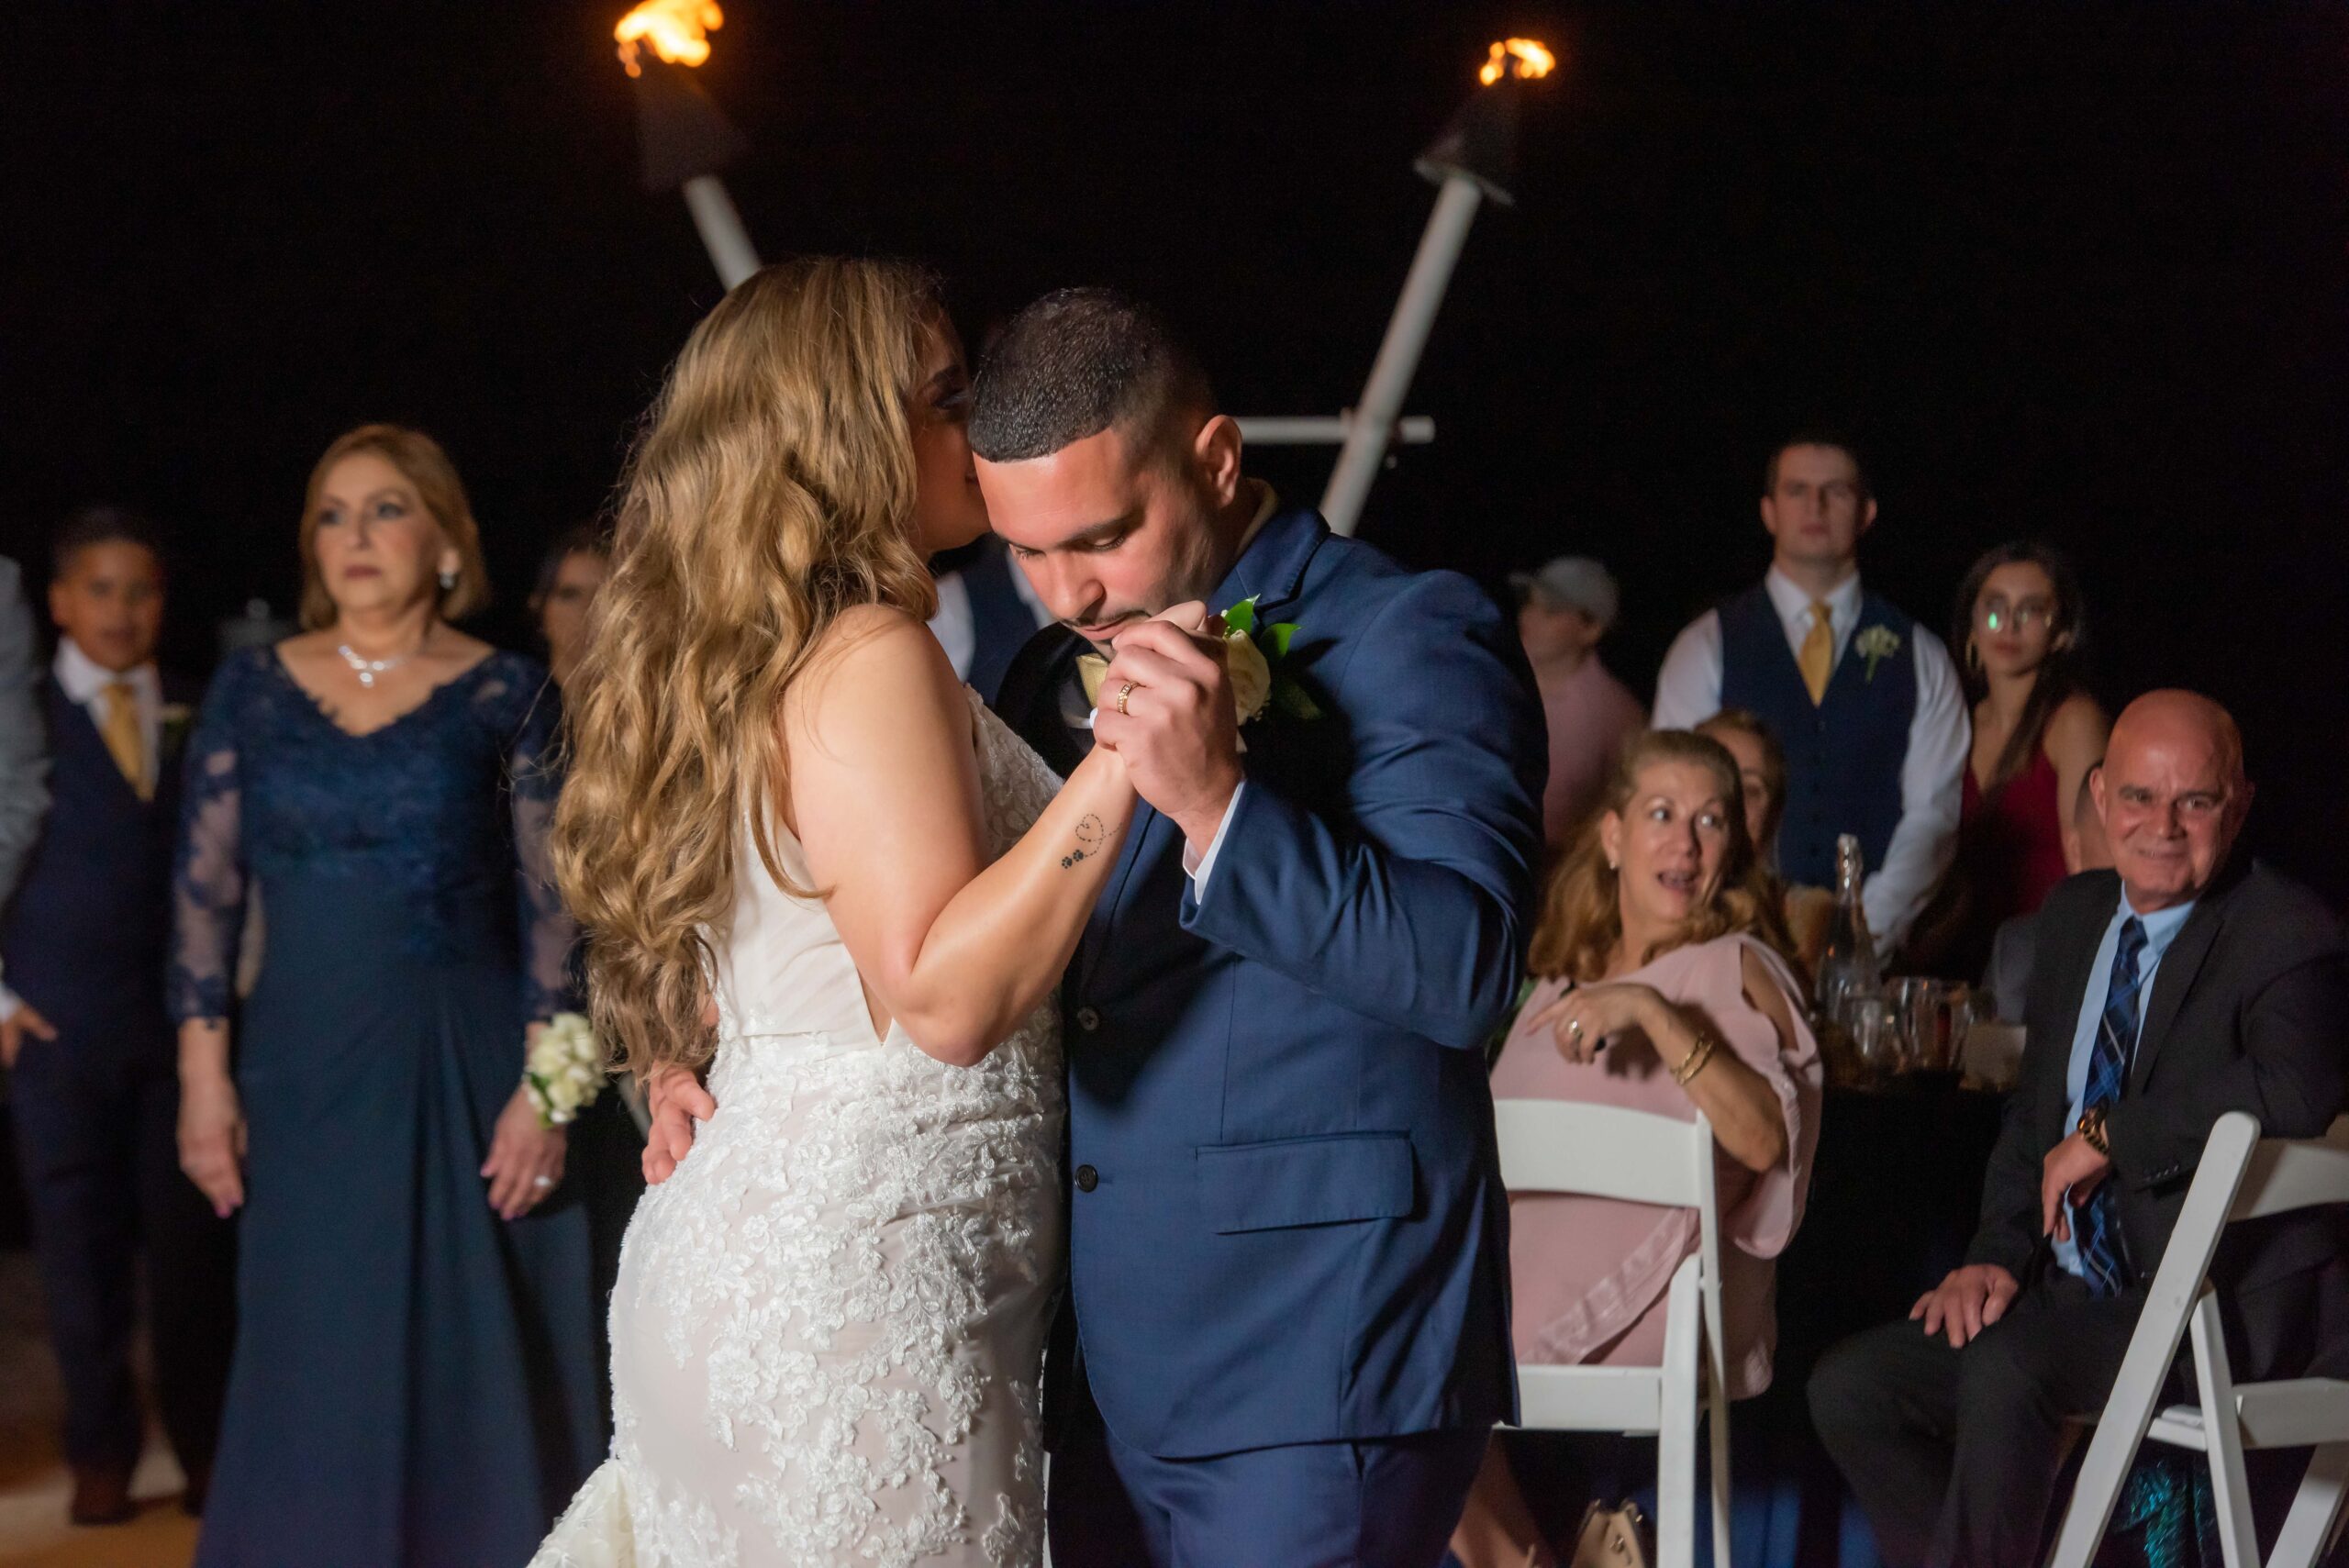 First dance captured by a wedding videographer in Homestead